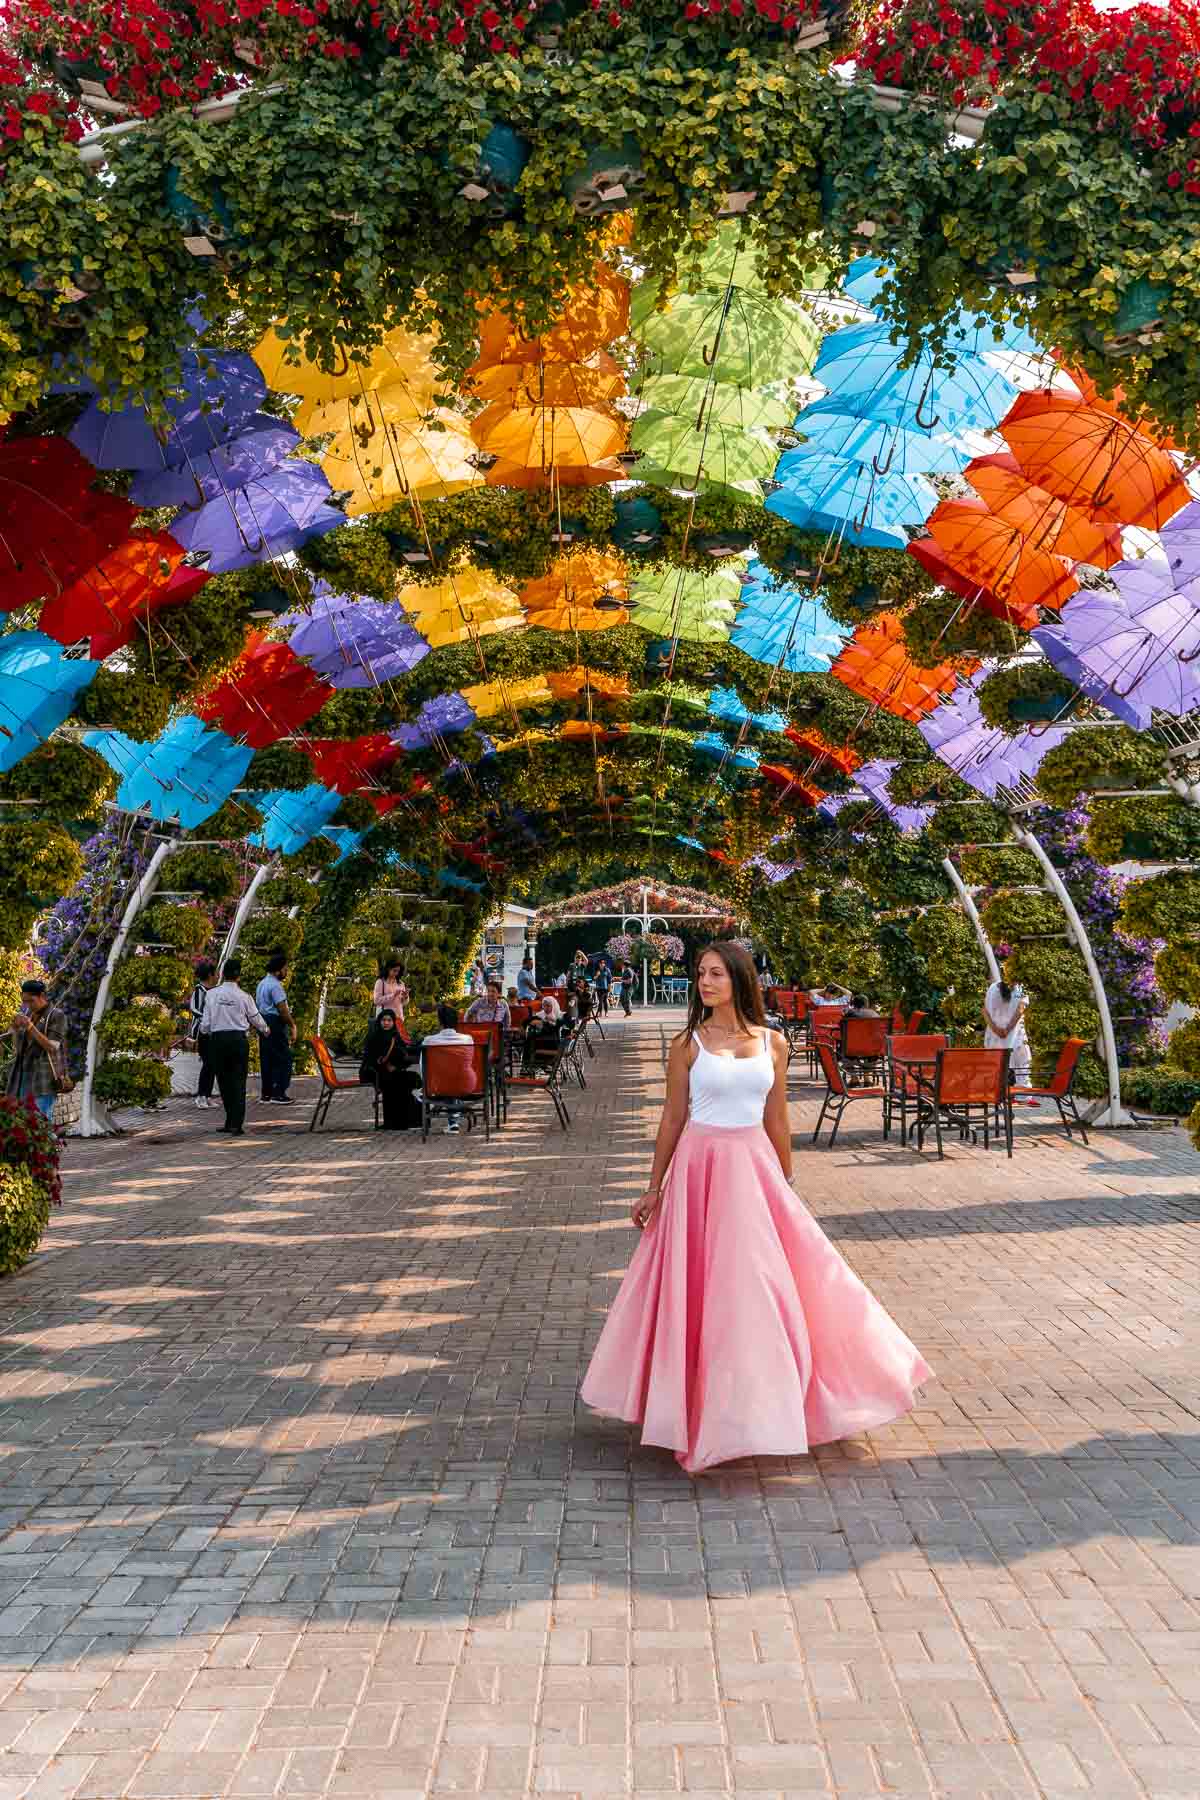 Girl in a pink skirt standing under colorful umbrellas in the Dubai Miracle Garden